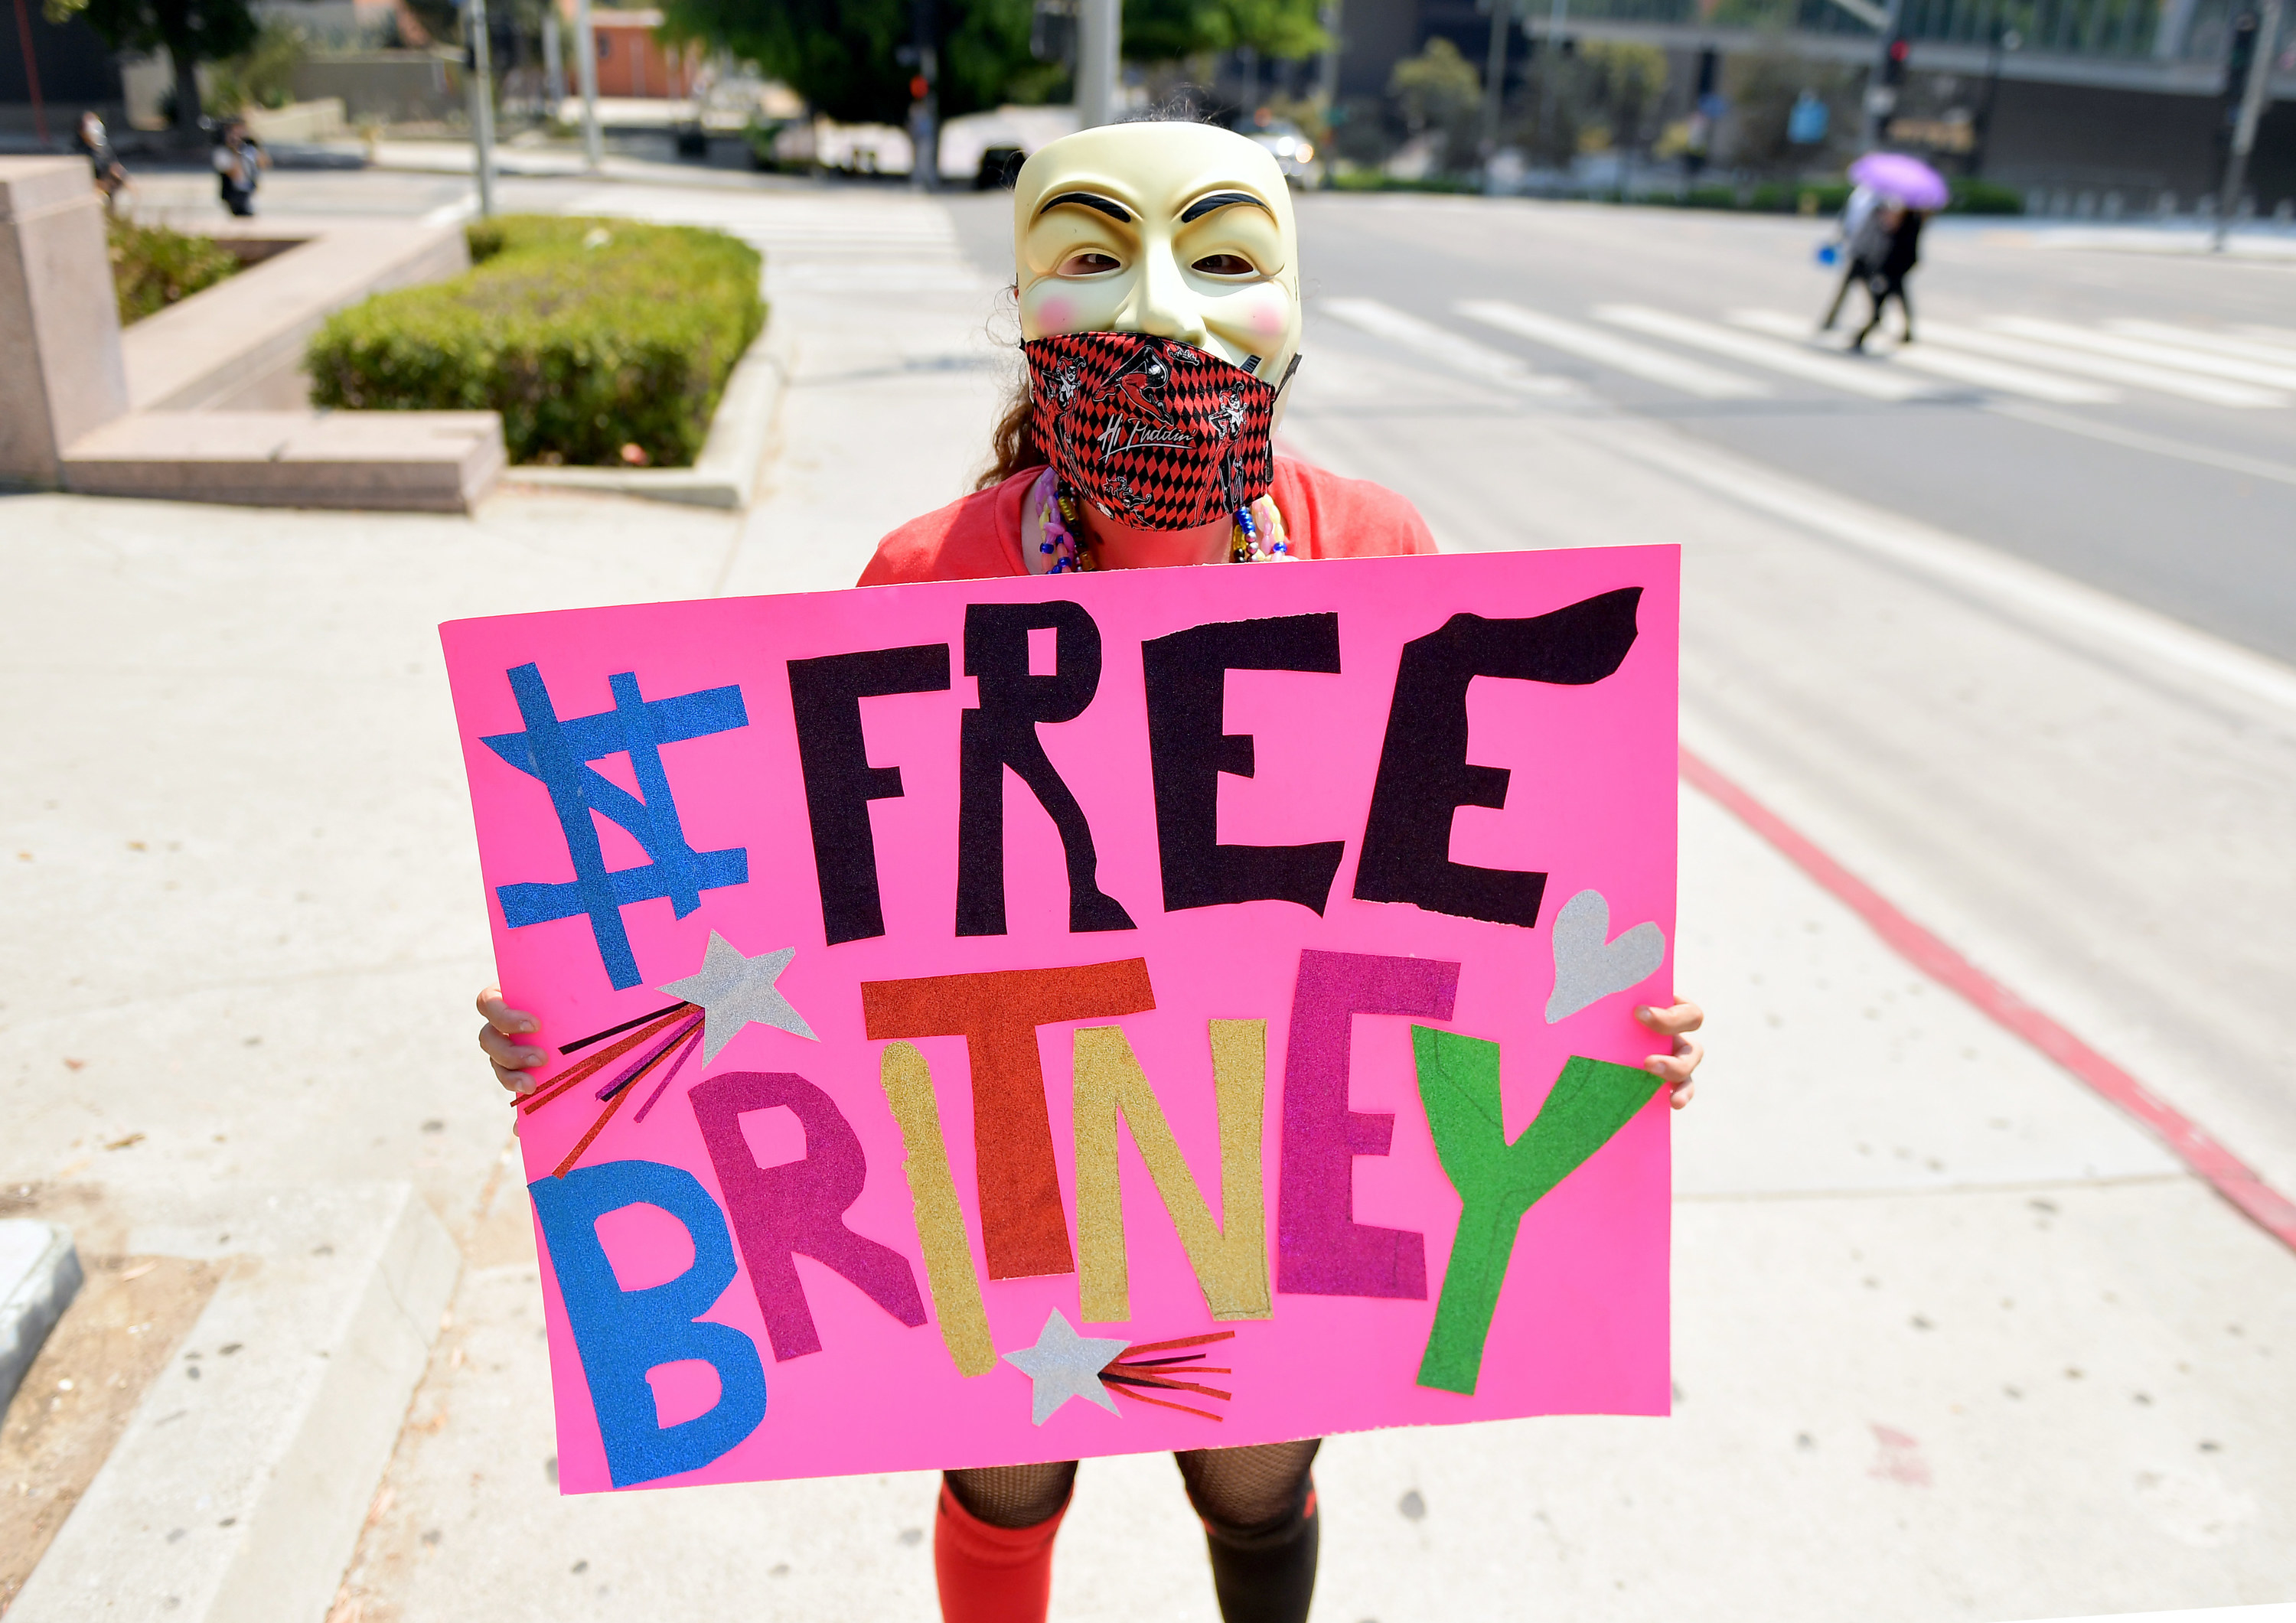 A person wearing a Guy Fawkes mask and face covering holds up a #FreeBritney sign